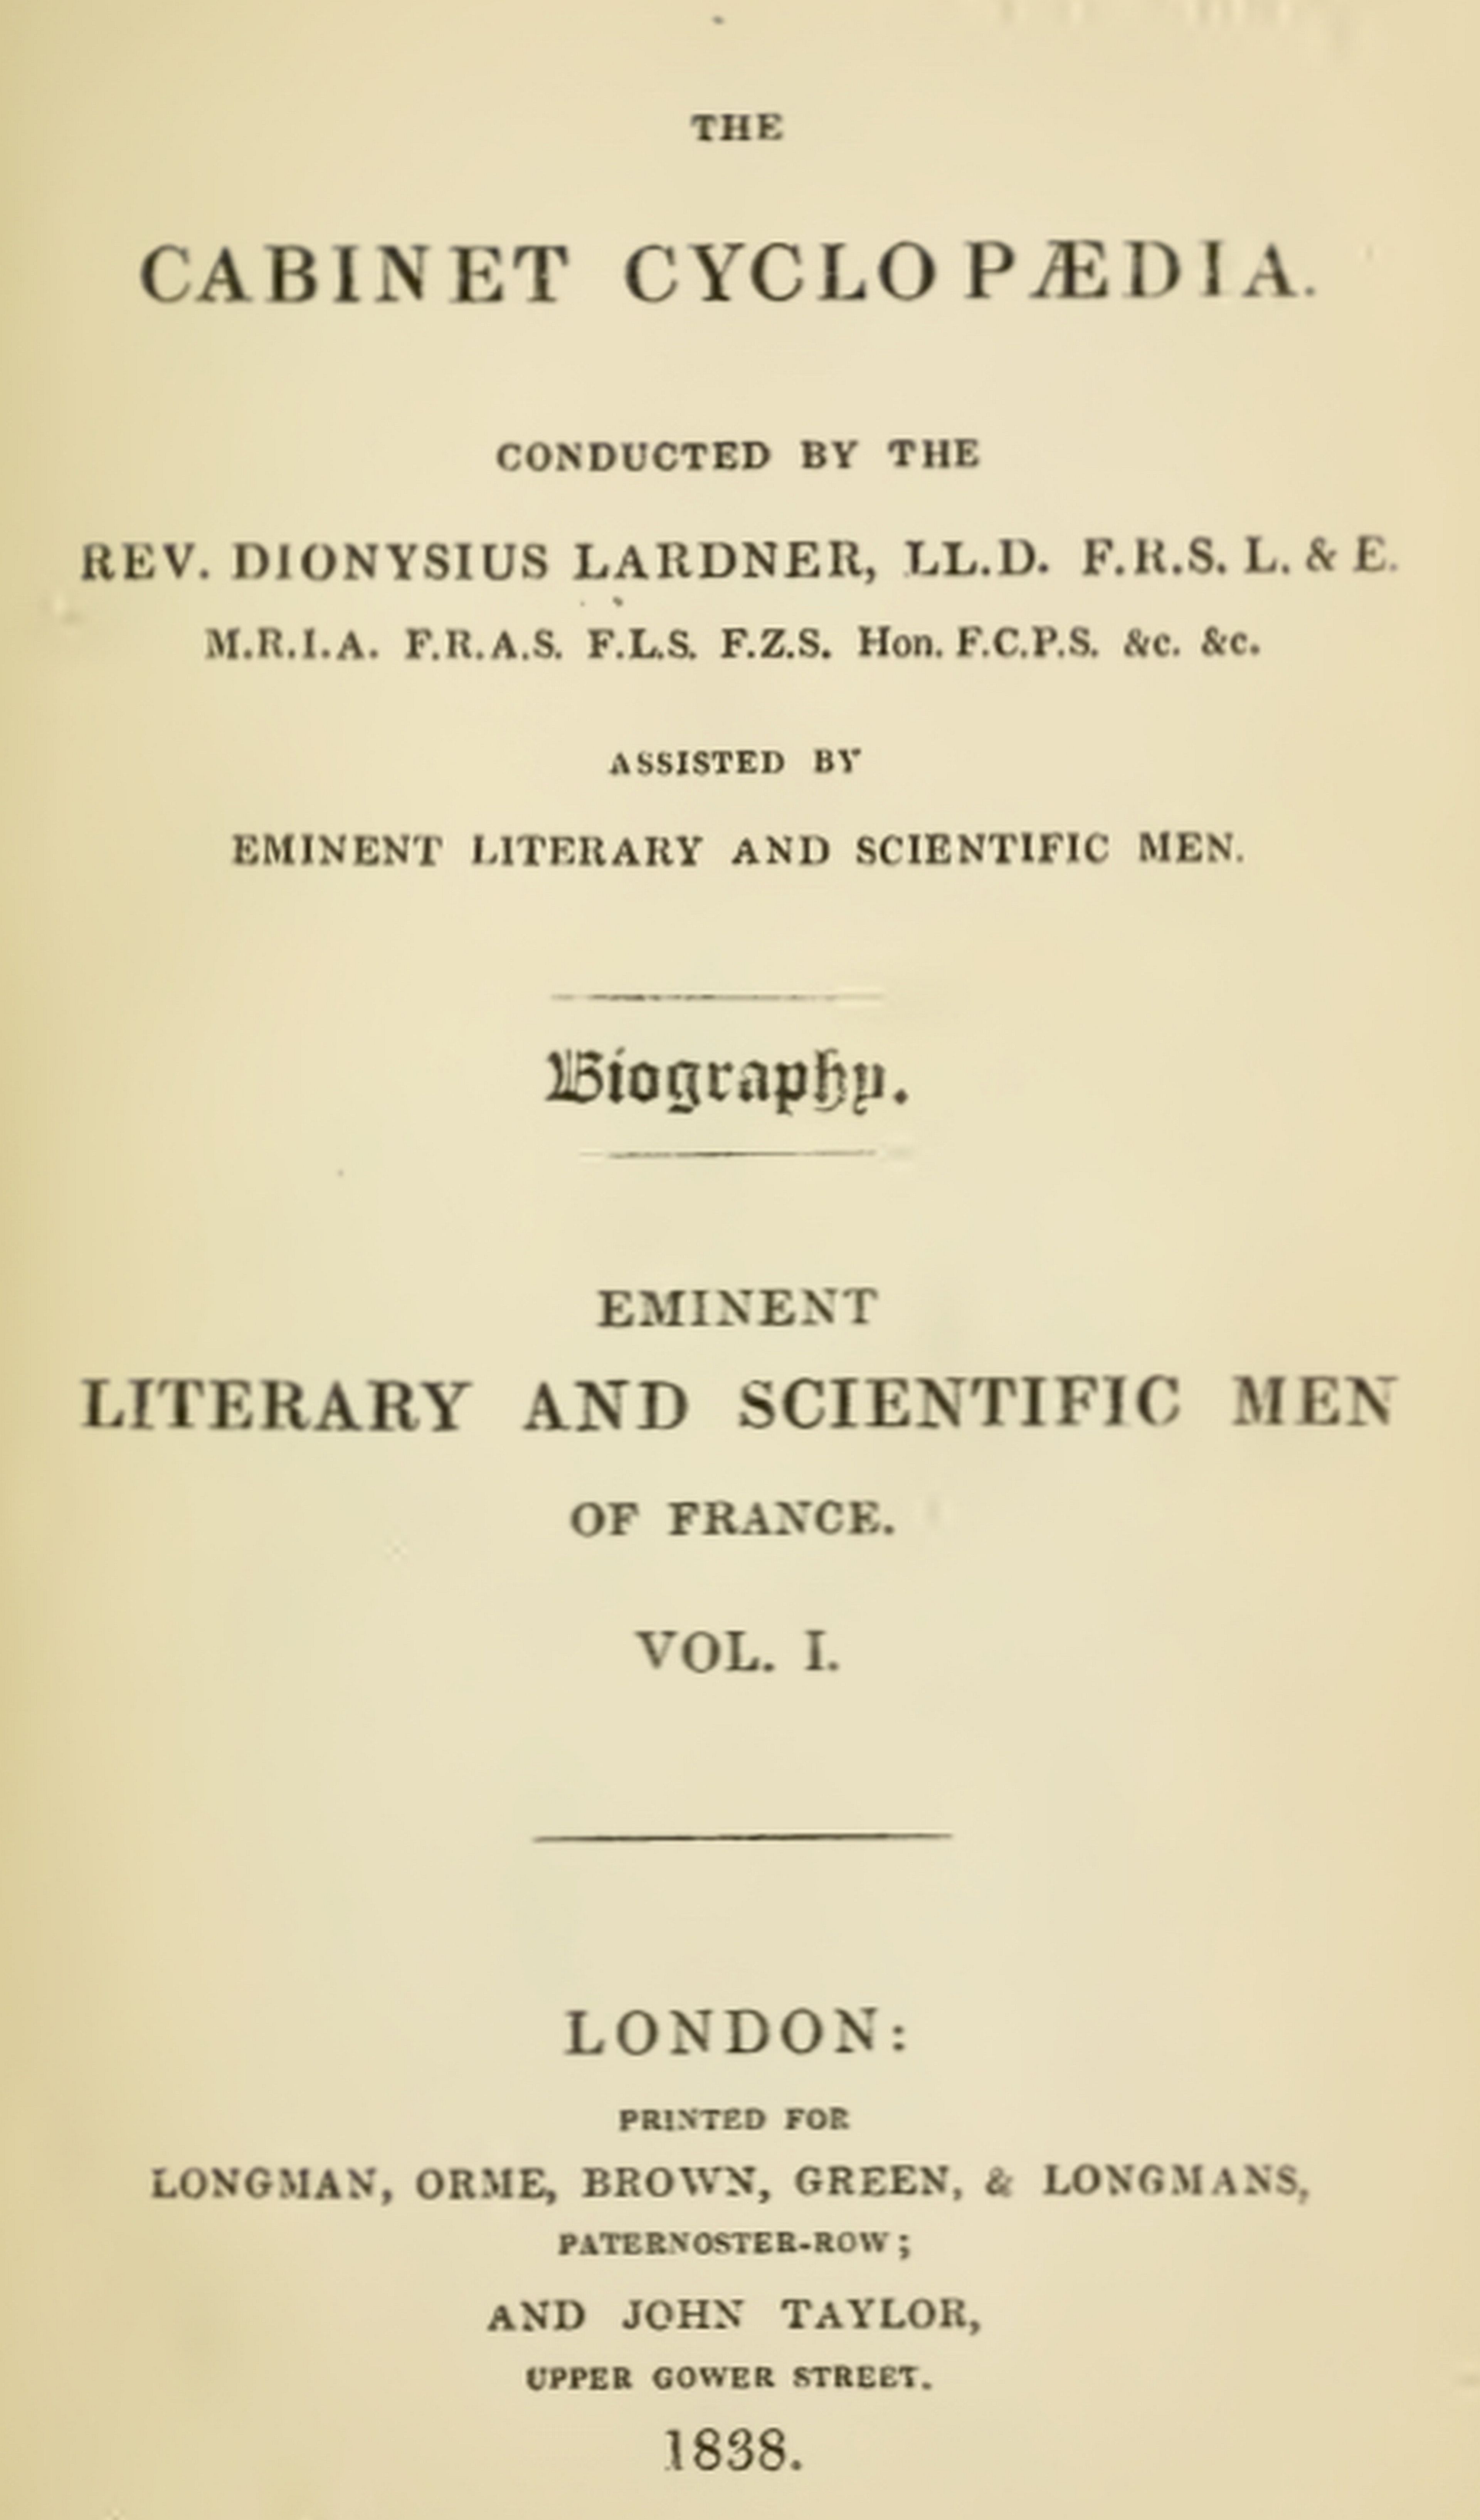 The Project Gutenberg eBook of Lives of the most eminent literary and scientific men of France,